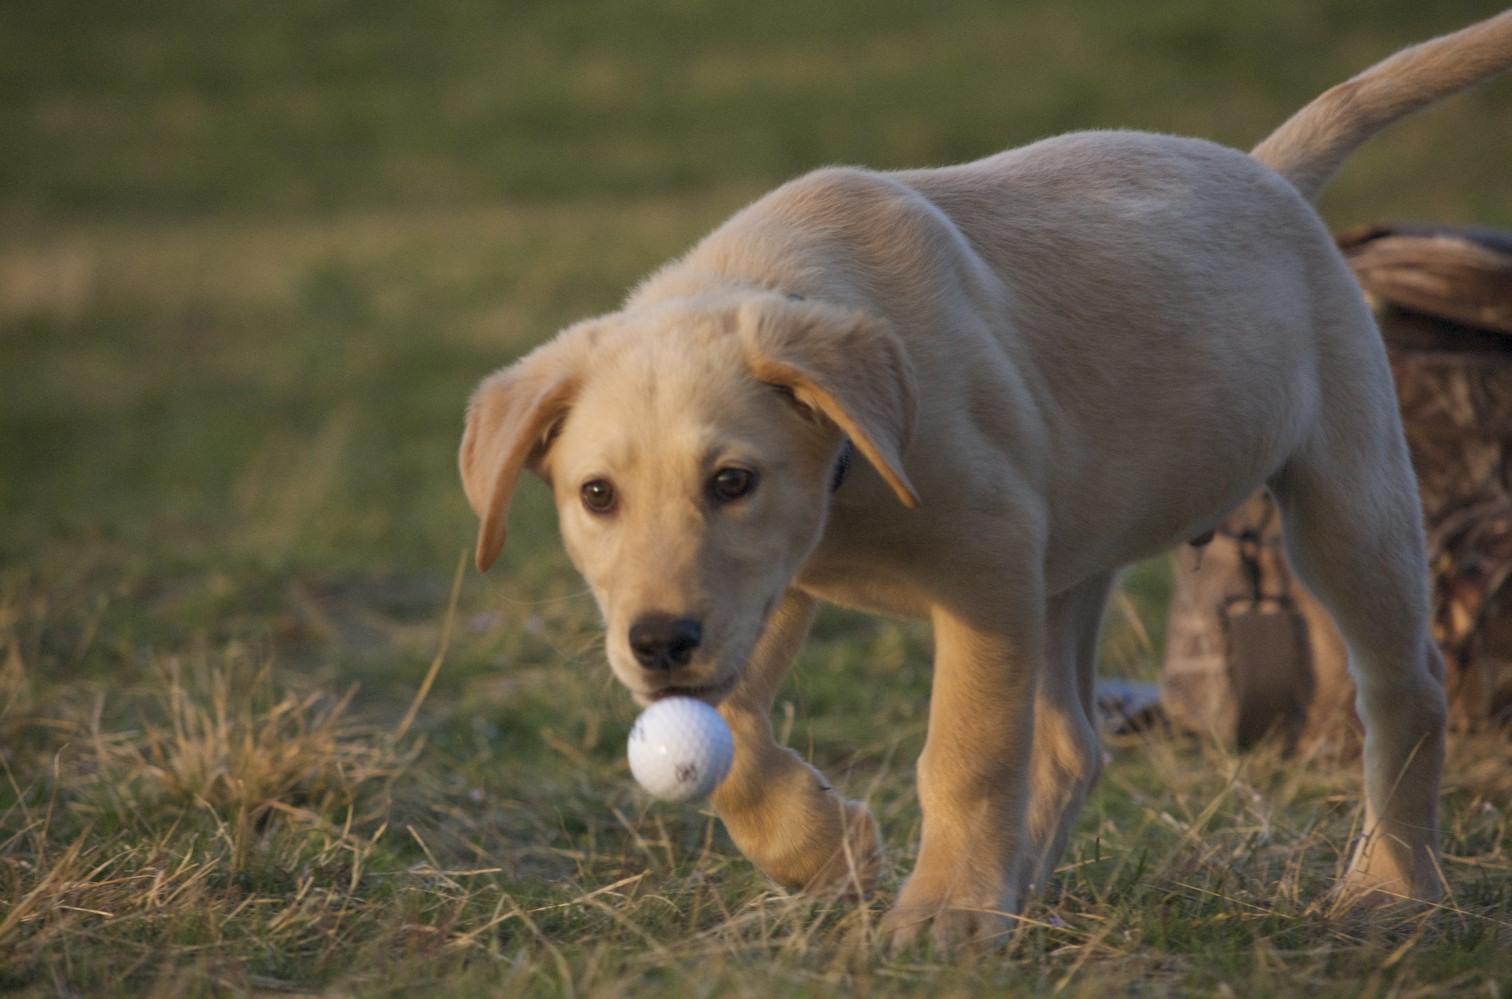 a puppy plays with a ball in a field